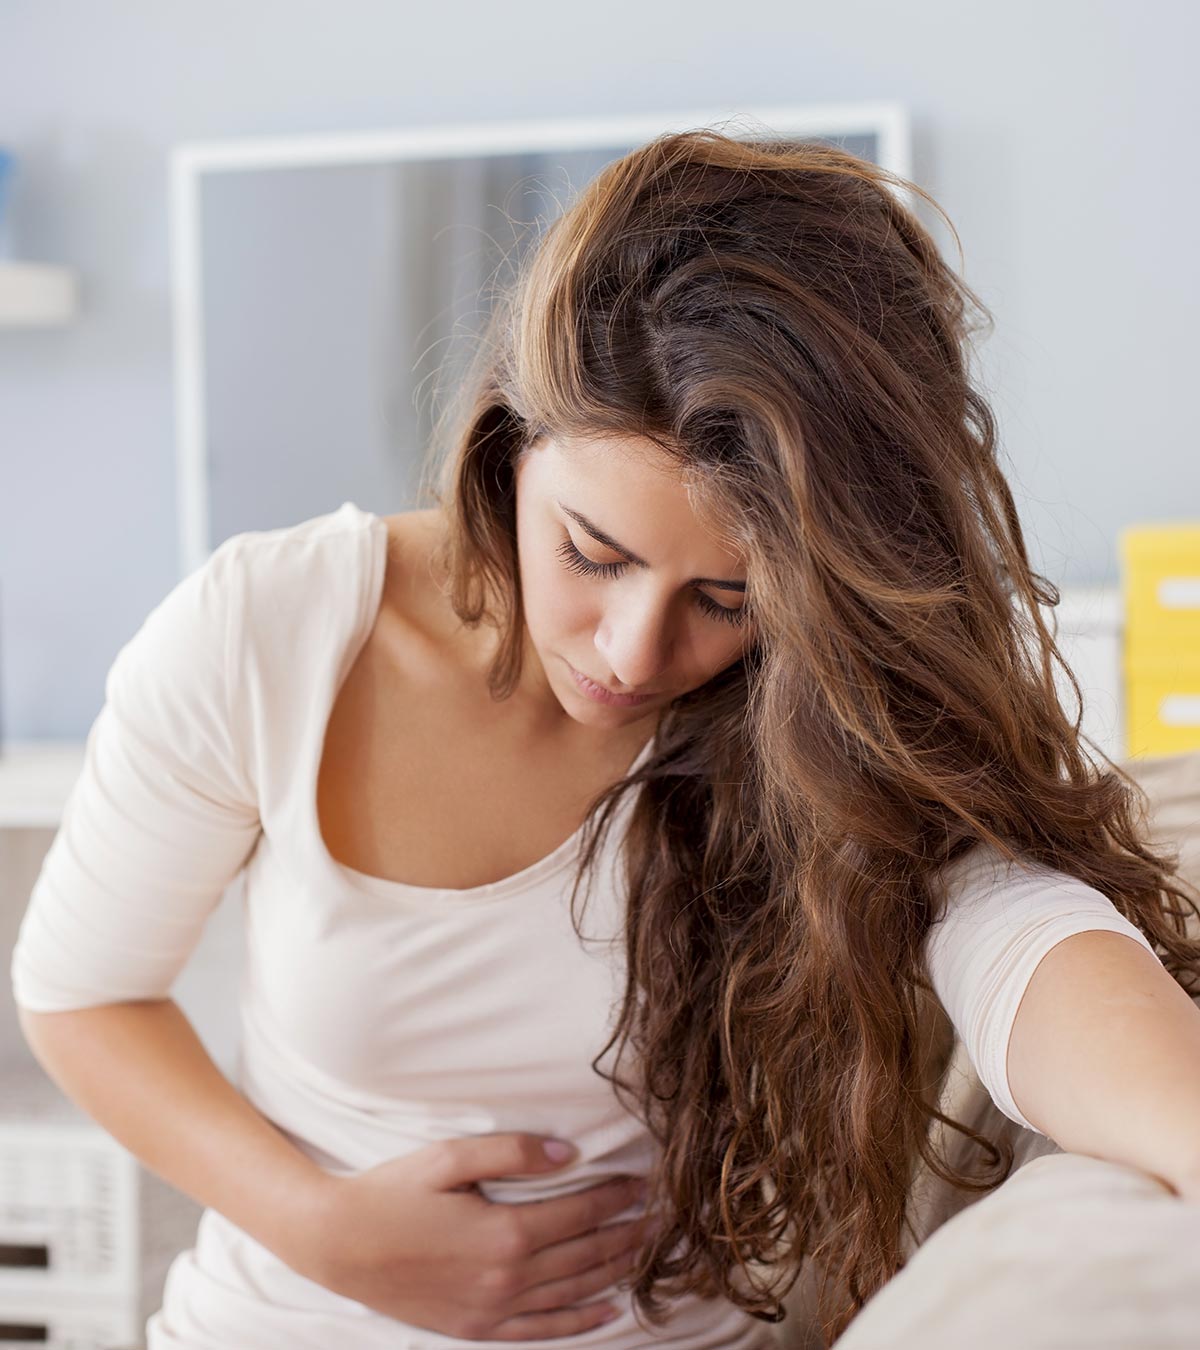 15 Early Signs That You’re Pregnant, Before You Miss Period